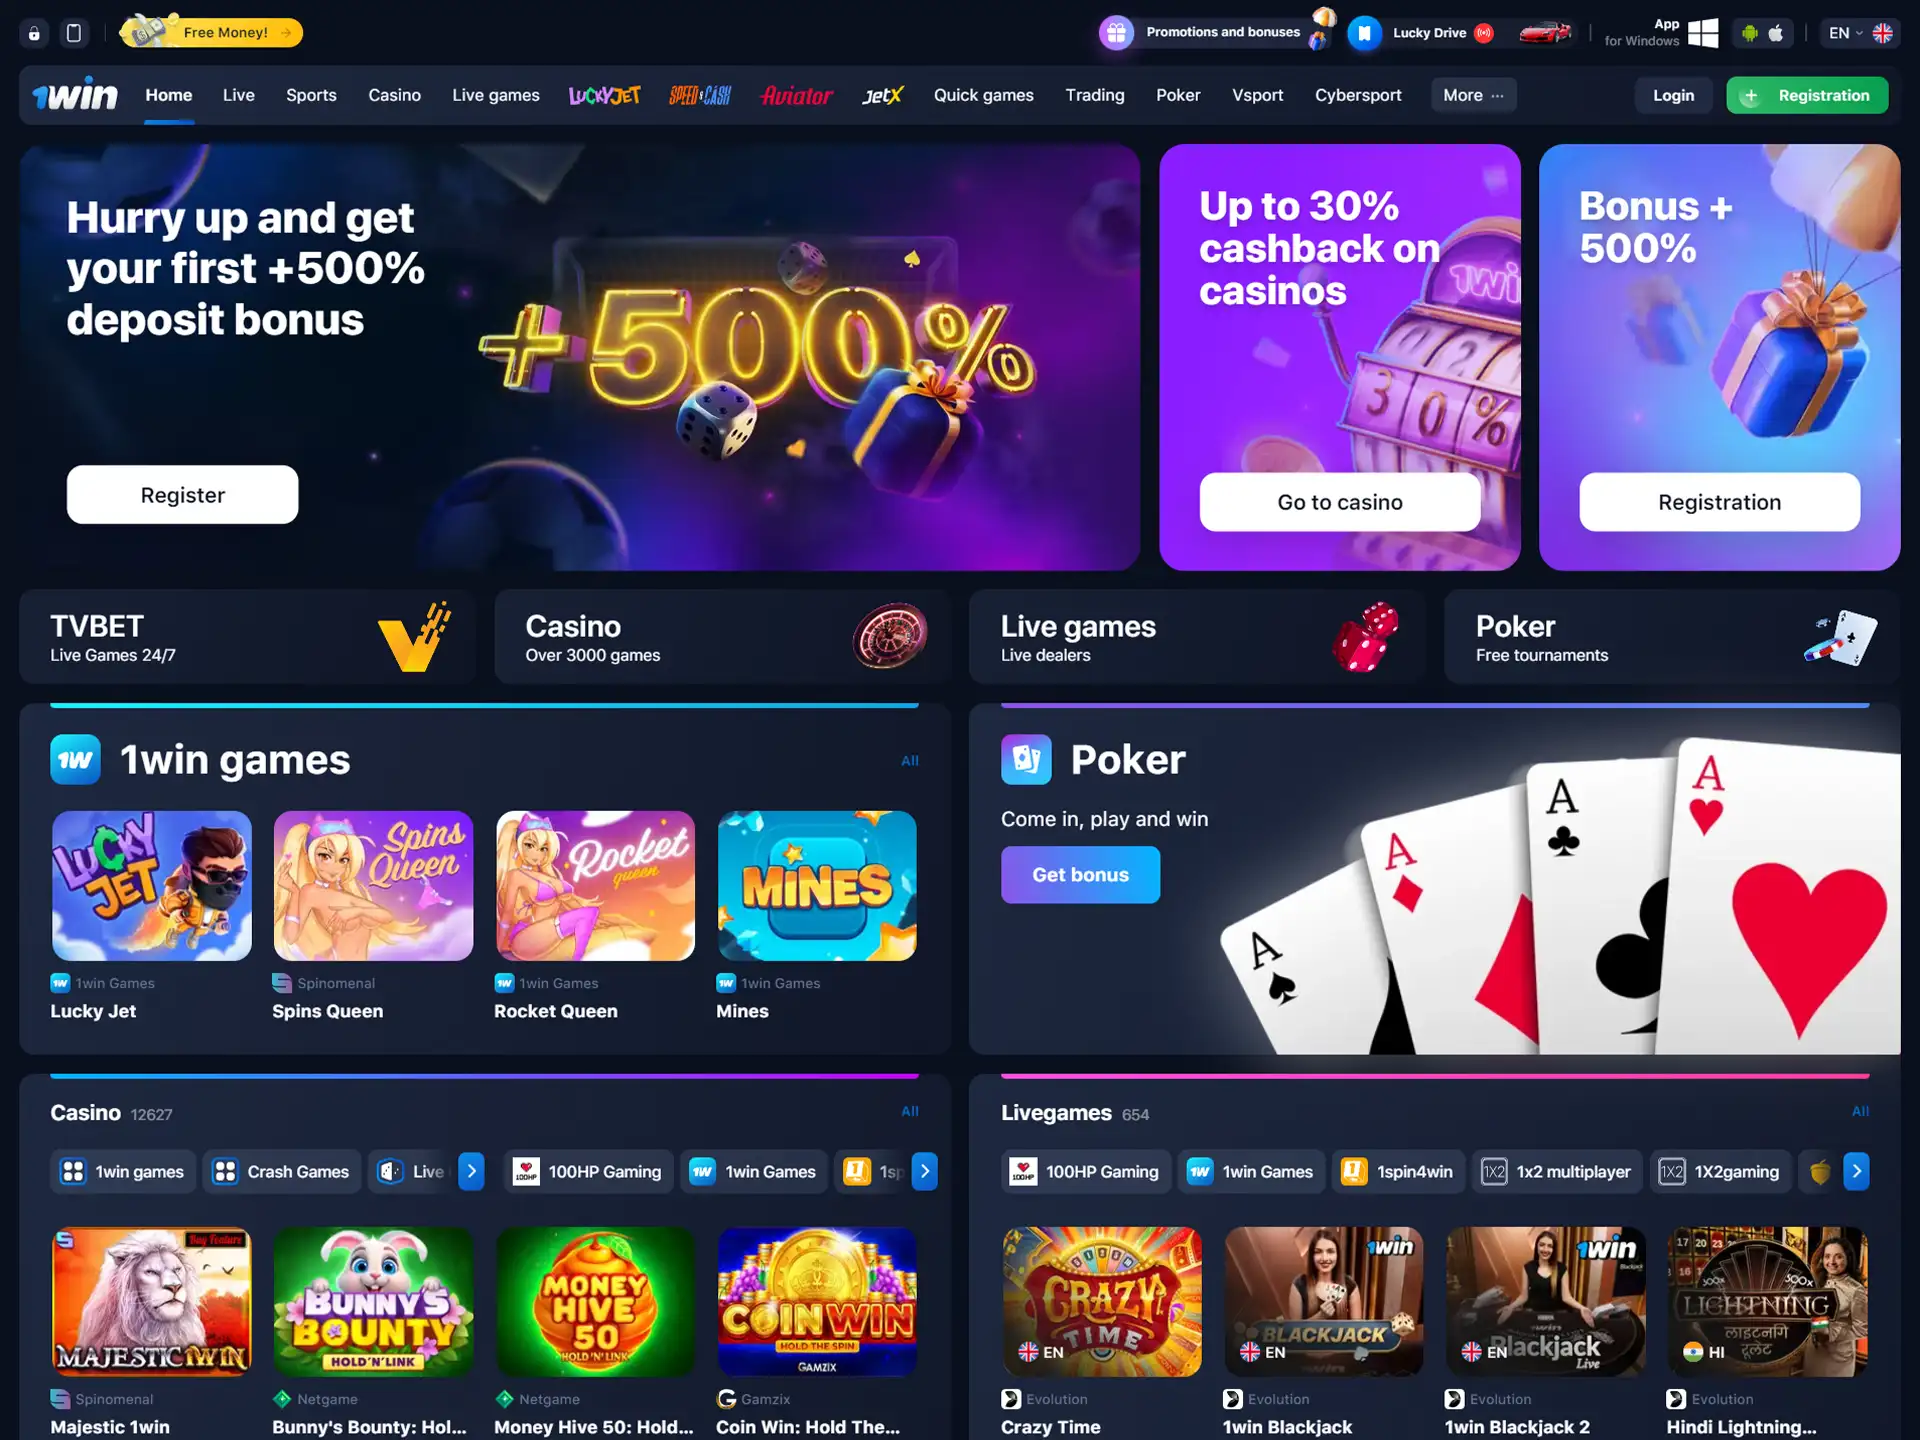 Home page of 1Win's sports betting and casino games site.